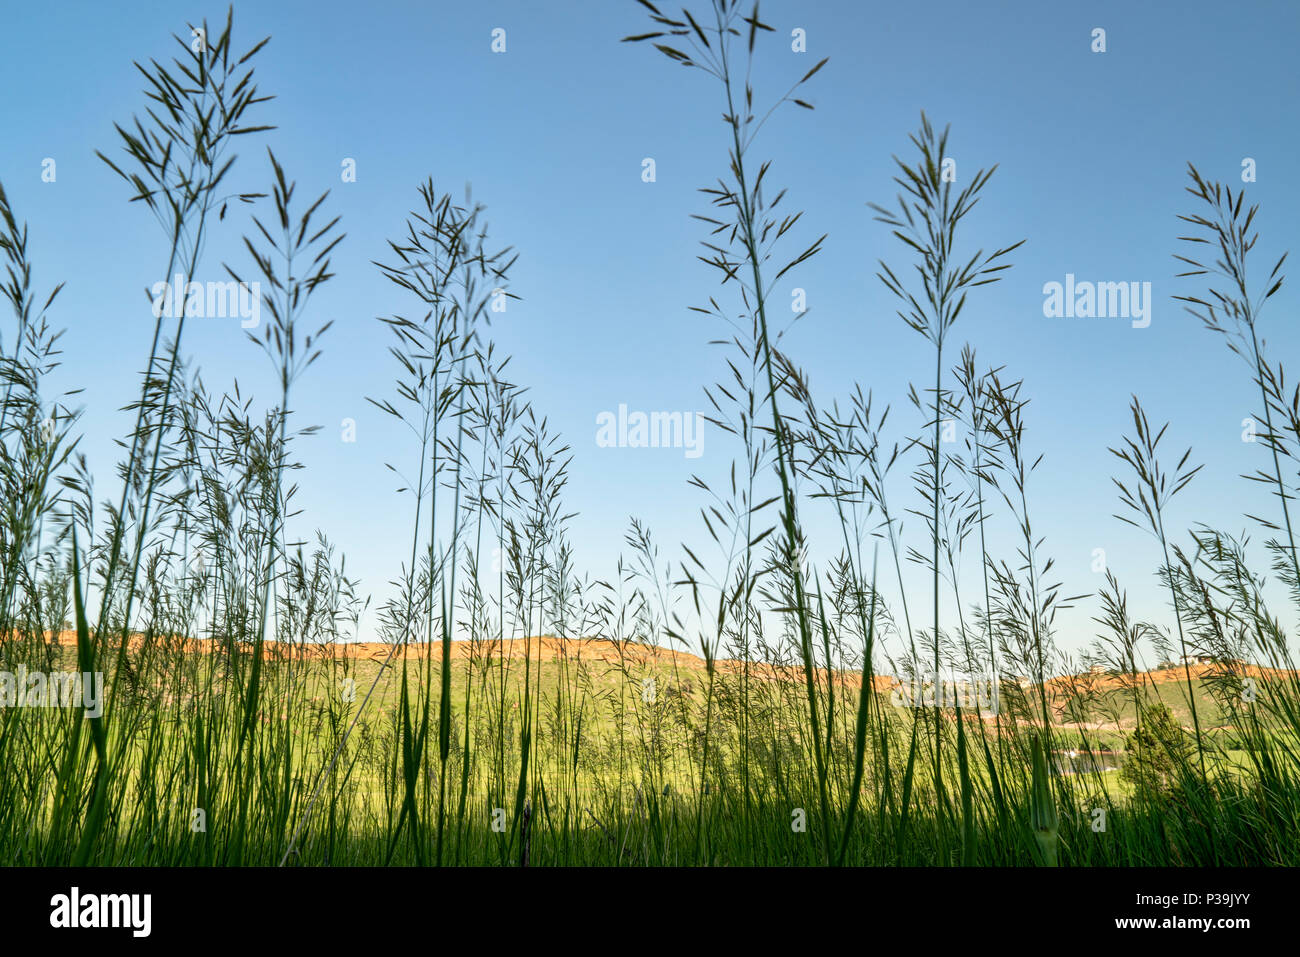 Tall grass silhouette against Colorado foothills landscape, late spring scenery Stock Photo